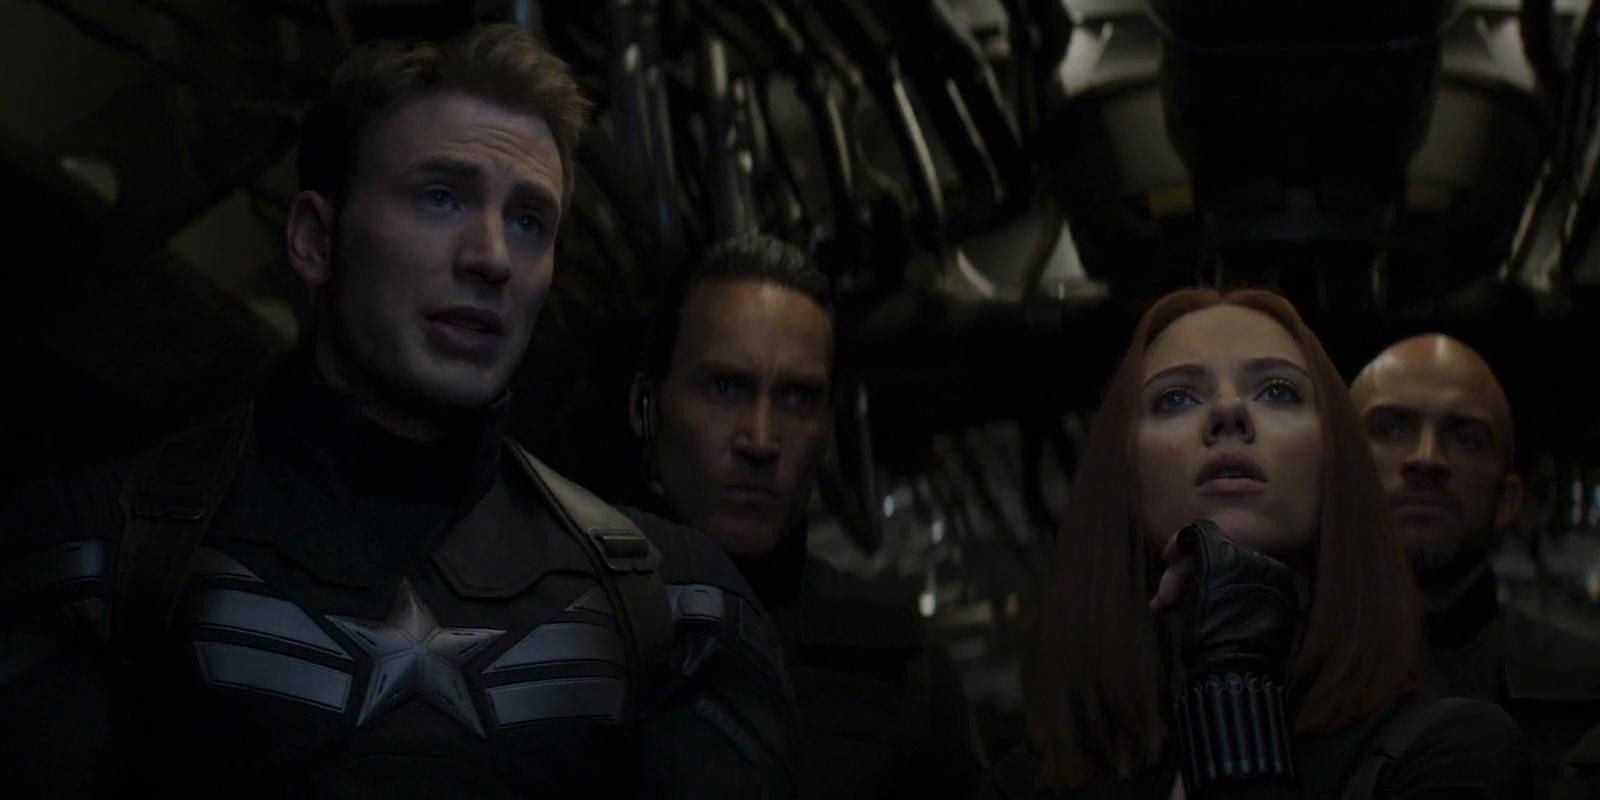 Cap and Black Widow wait for their mission to start from Winter Soldier